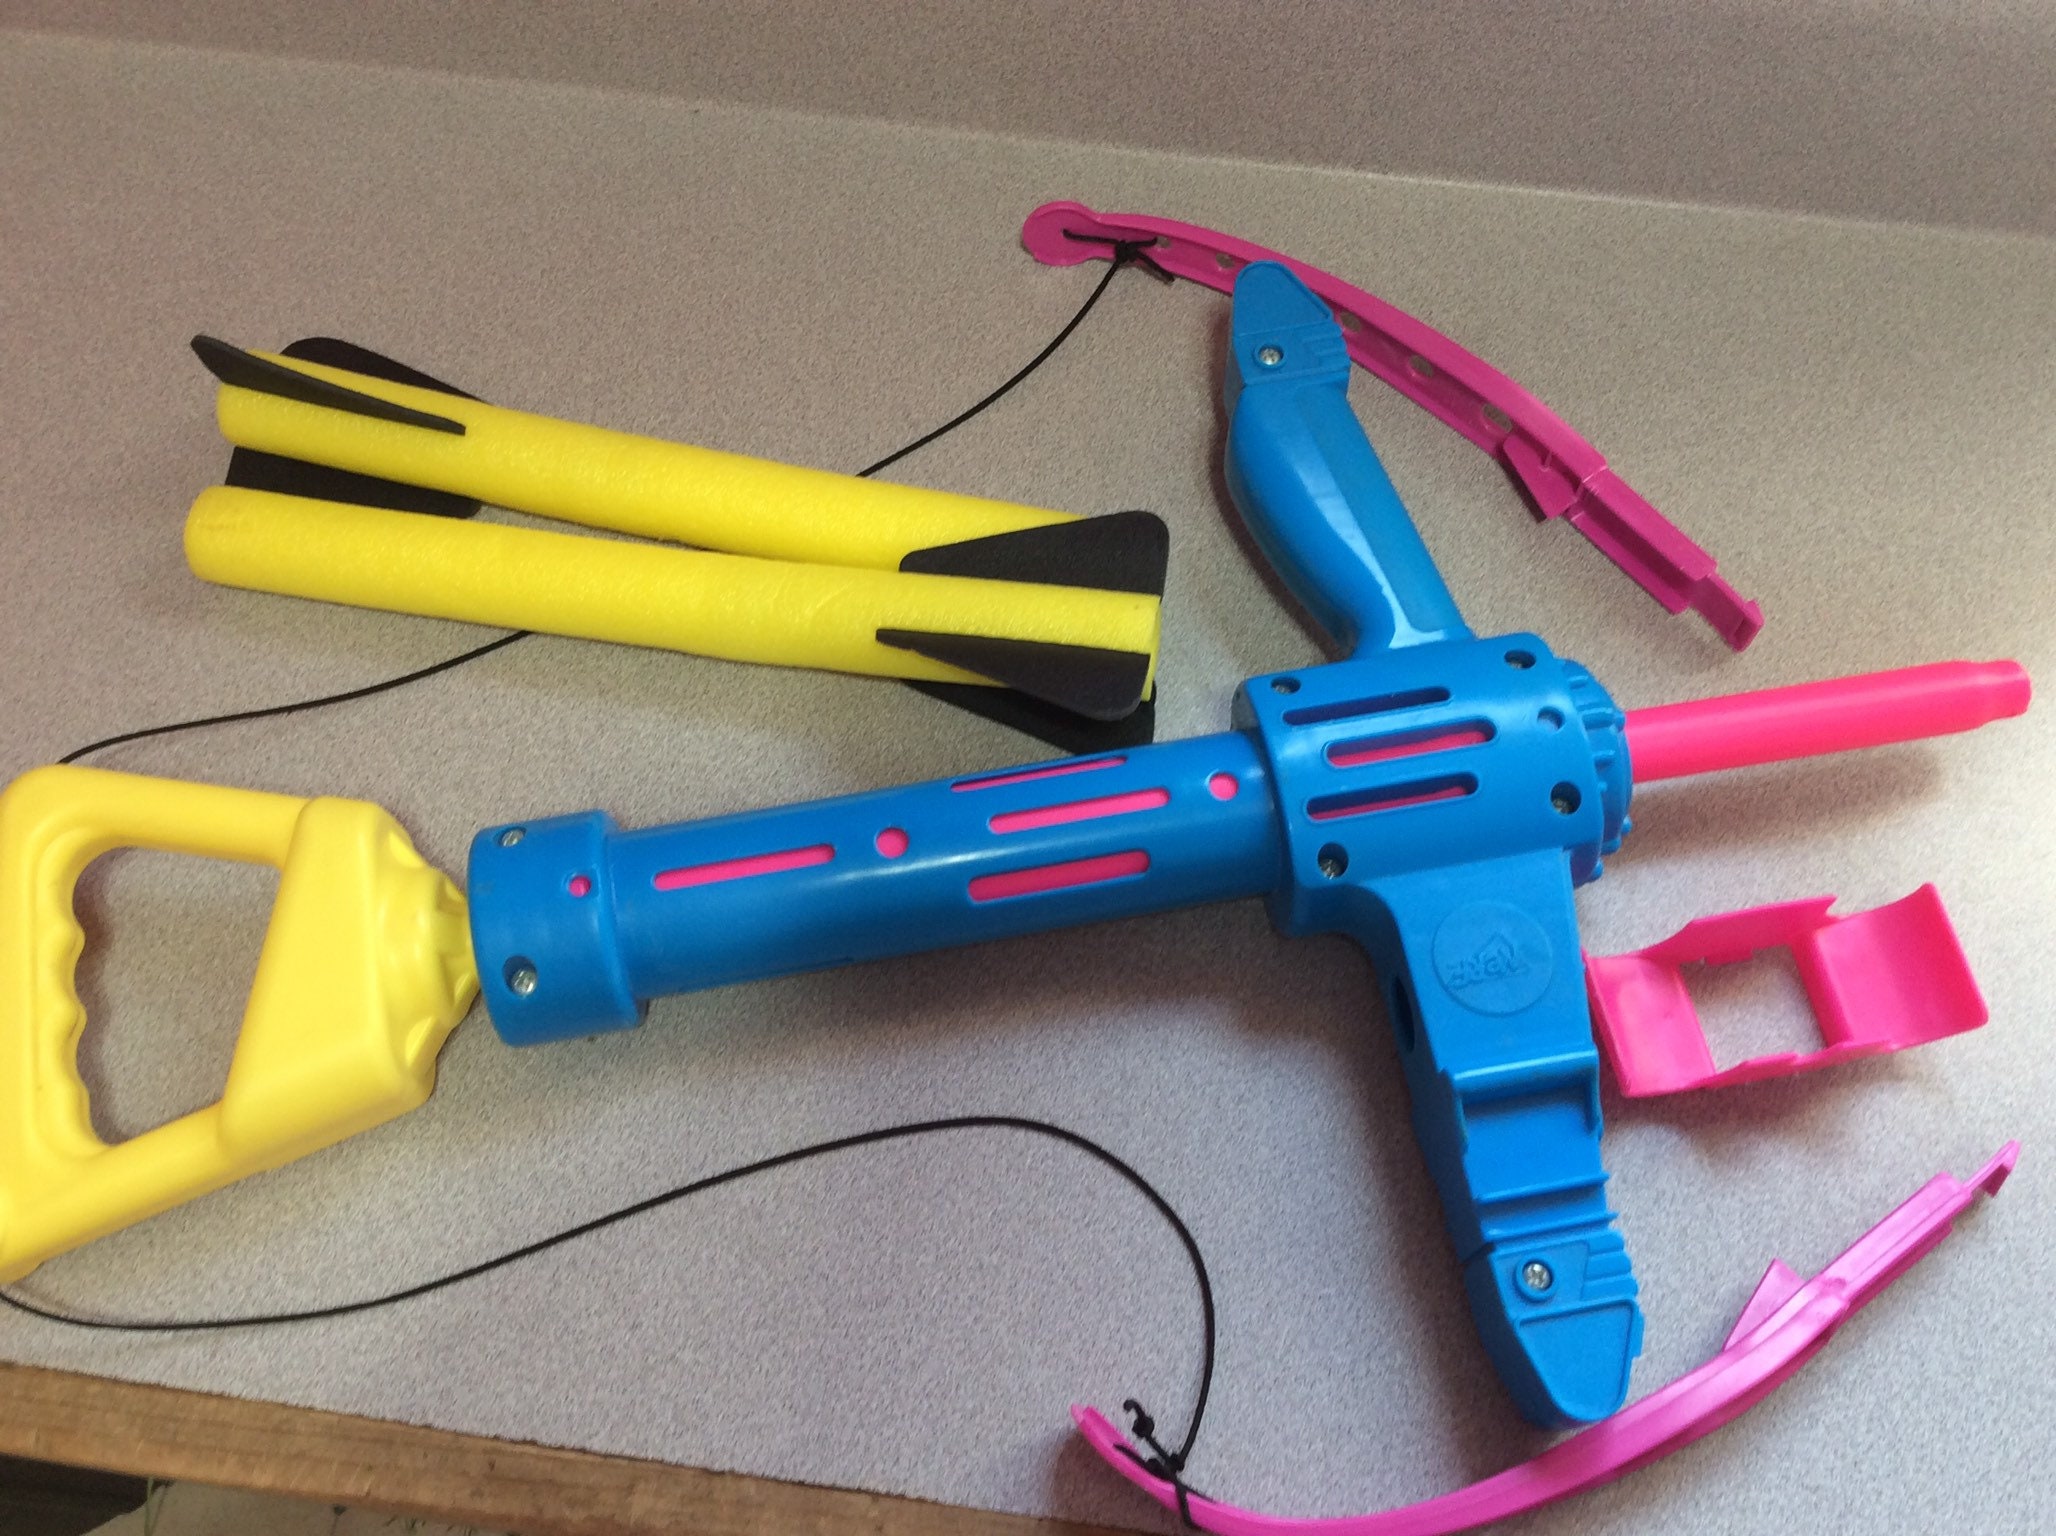 1991 Kenner Nerf Bow and Arrow Vintage Nerf Gun and Arrow - Etsy UK